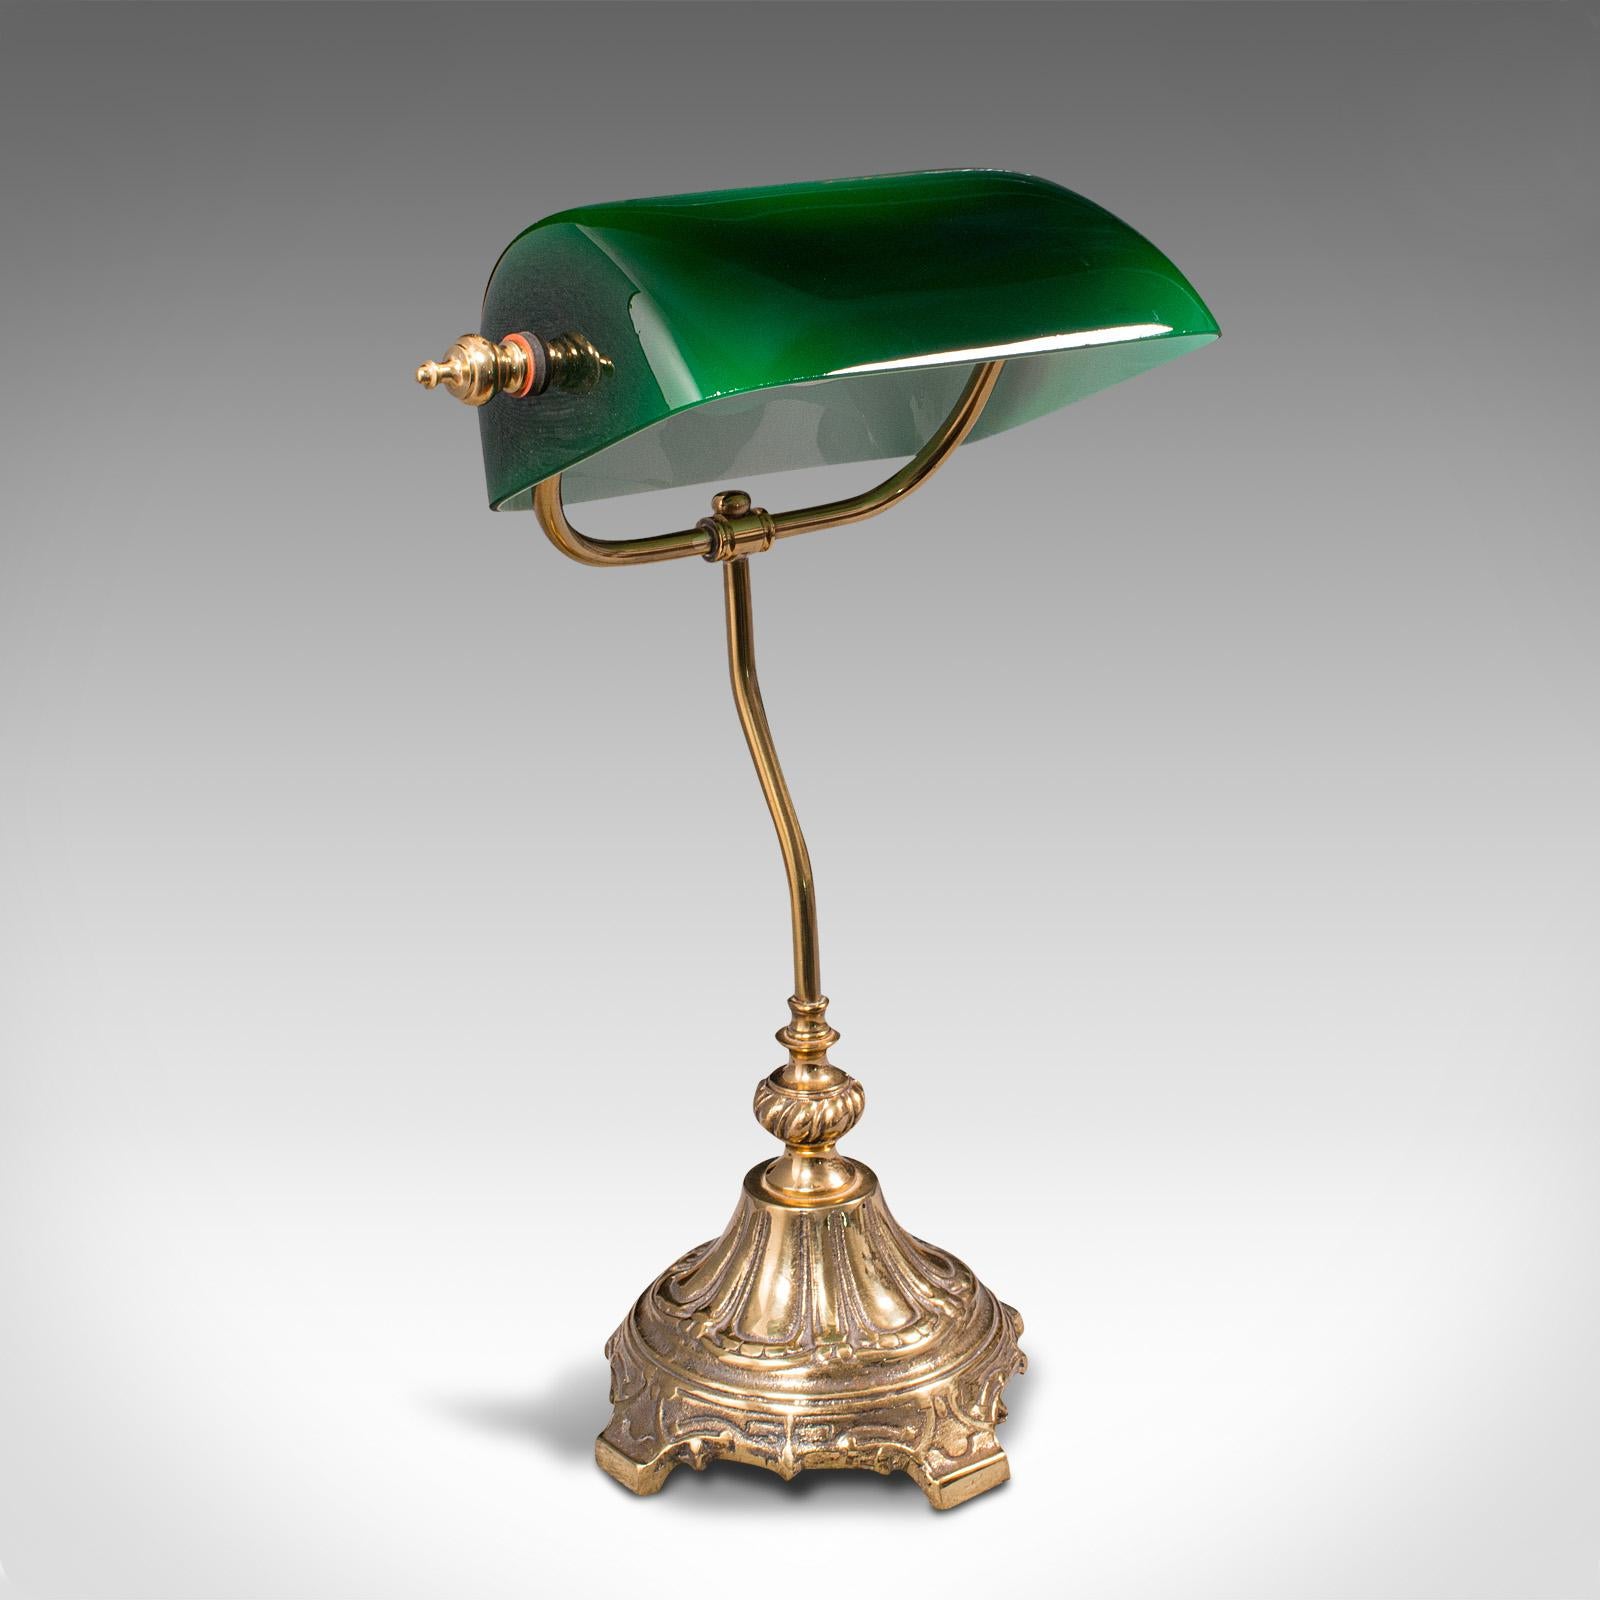 This is a vintage barrister's lamp. An English, glass and brass adjustable banker's desk light, dating to the mid 20th century, circa 1960.

Delightful example, with the executive appeal suited to the grandest desks
Displays a desirable aged